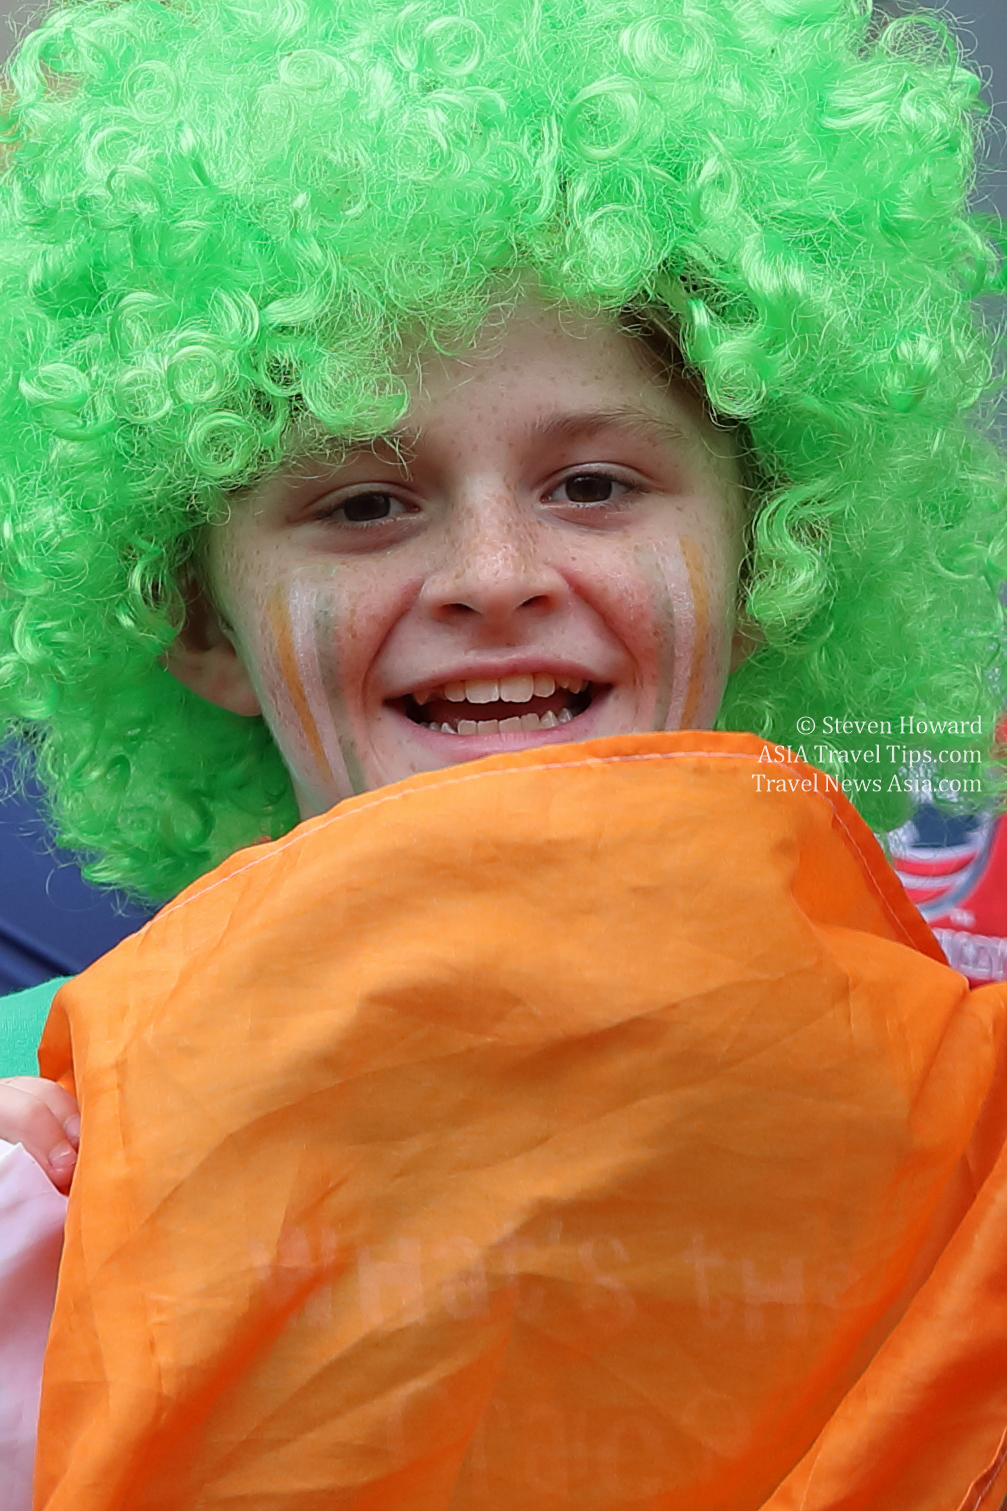 Ireland, whose appearance in 2018 – when they reached the semi-finals – was their first at the Cathay Pacific / HSBC Hong Kong Sevens in over a decade, will be back again in 2019. Picture of this young Irish fan at the stadium by Steven Howard of TravelNewsAsia.com Click to enlarge.